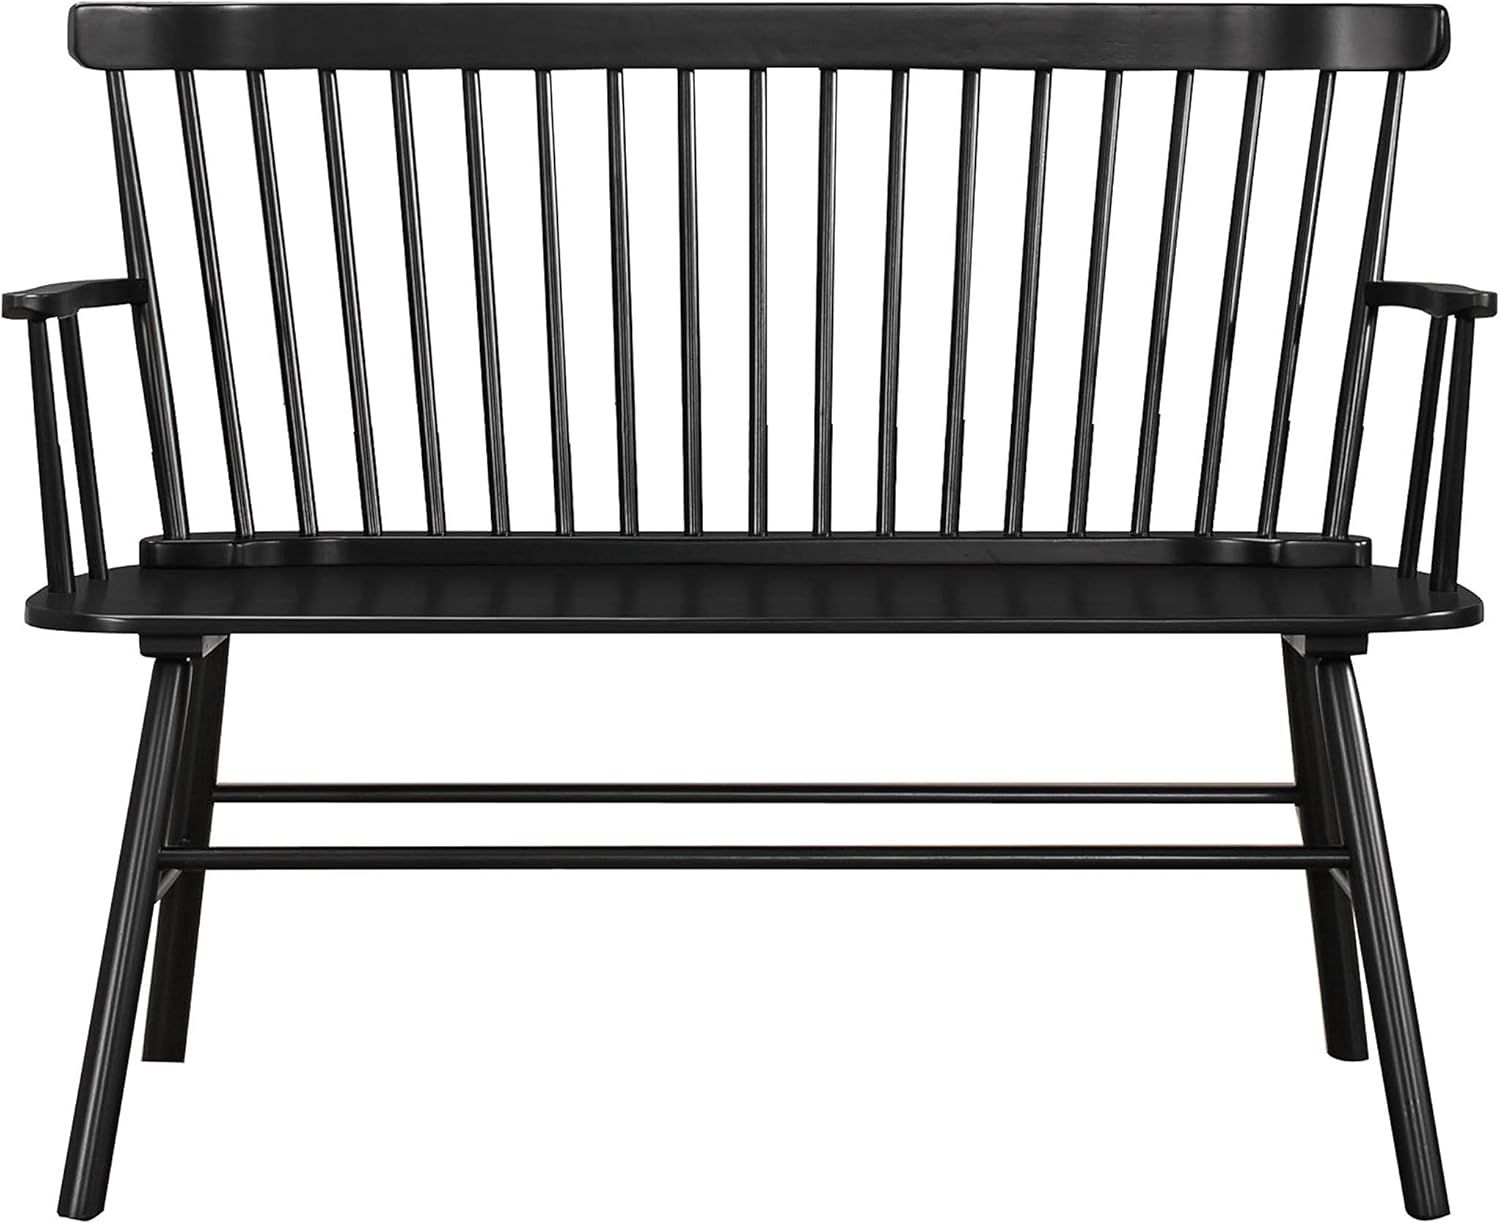 Benjara Transitional Style Curved Design Spindle Back Bench with Splayed Legs, Black | Amazon (US)